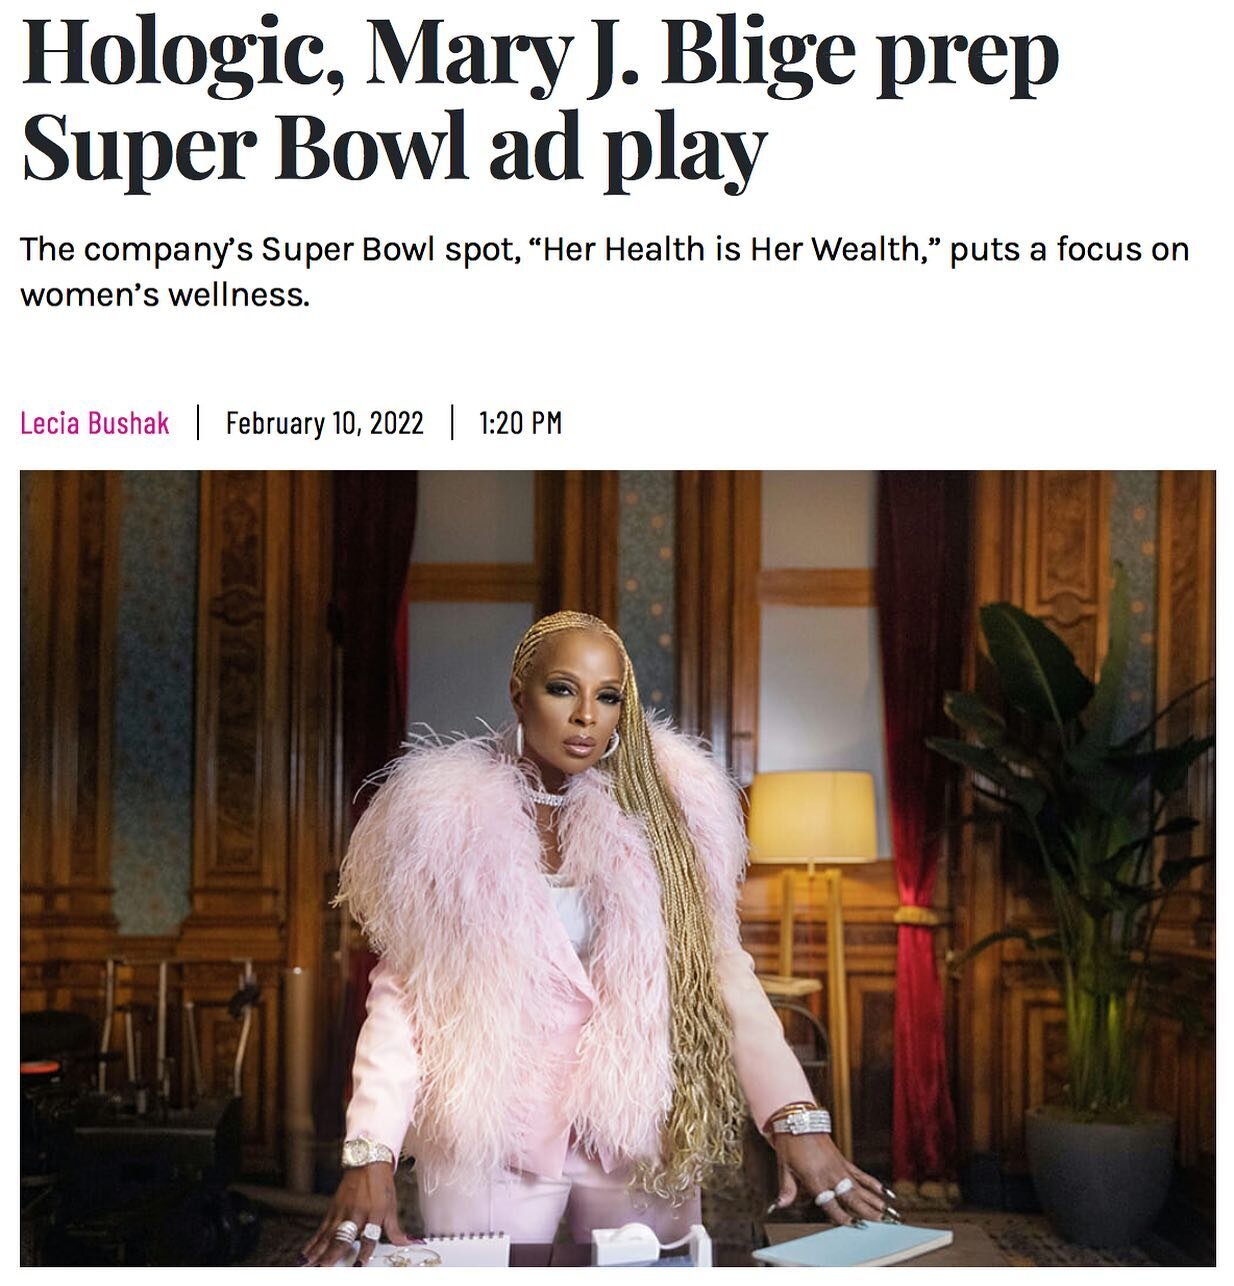 Can You Clear Me Now proudly provided music strategy and clearance for Hologic&rsquo;s &lsquo;Her Health is Her Wealth&rsquo; Super Bowl LVI commercial featuring Mary J. Blige